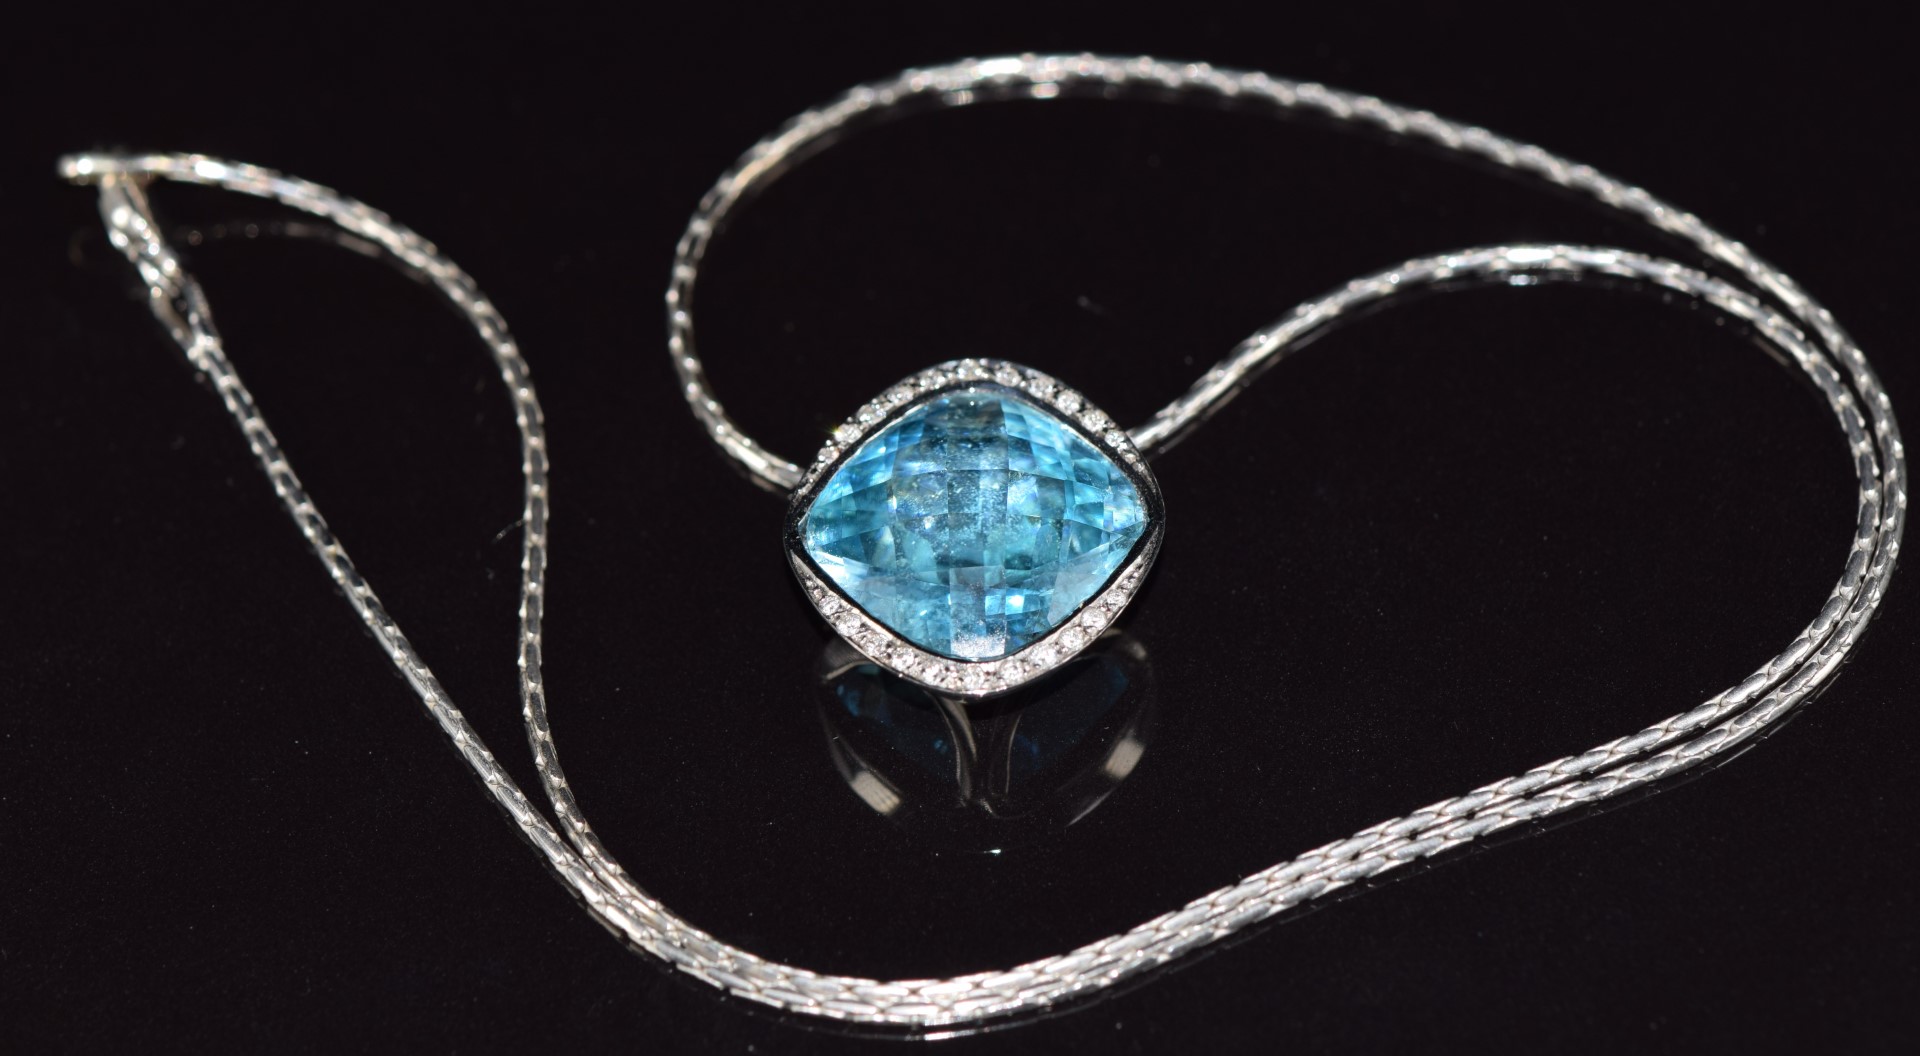 An 18ct white gold pendant set with a blue topaz and diamonds, on 18ct white gold chain, 15.1g - Image 4 of 5